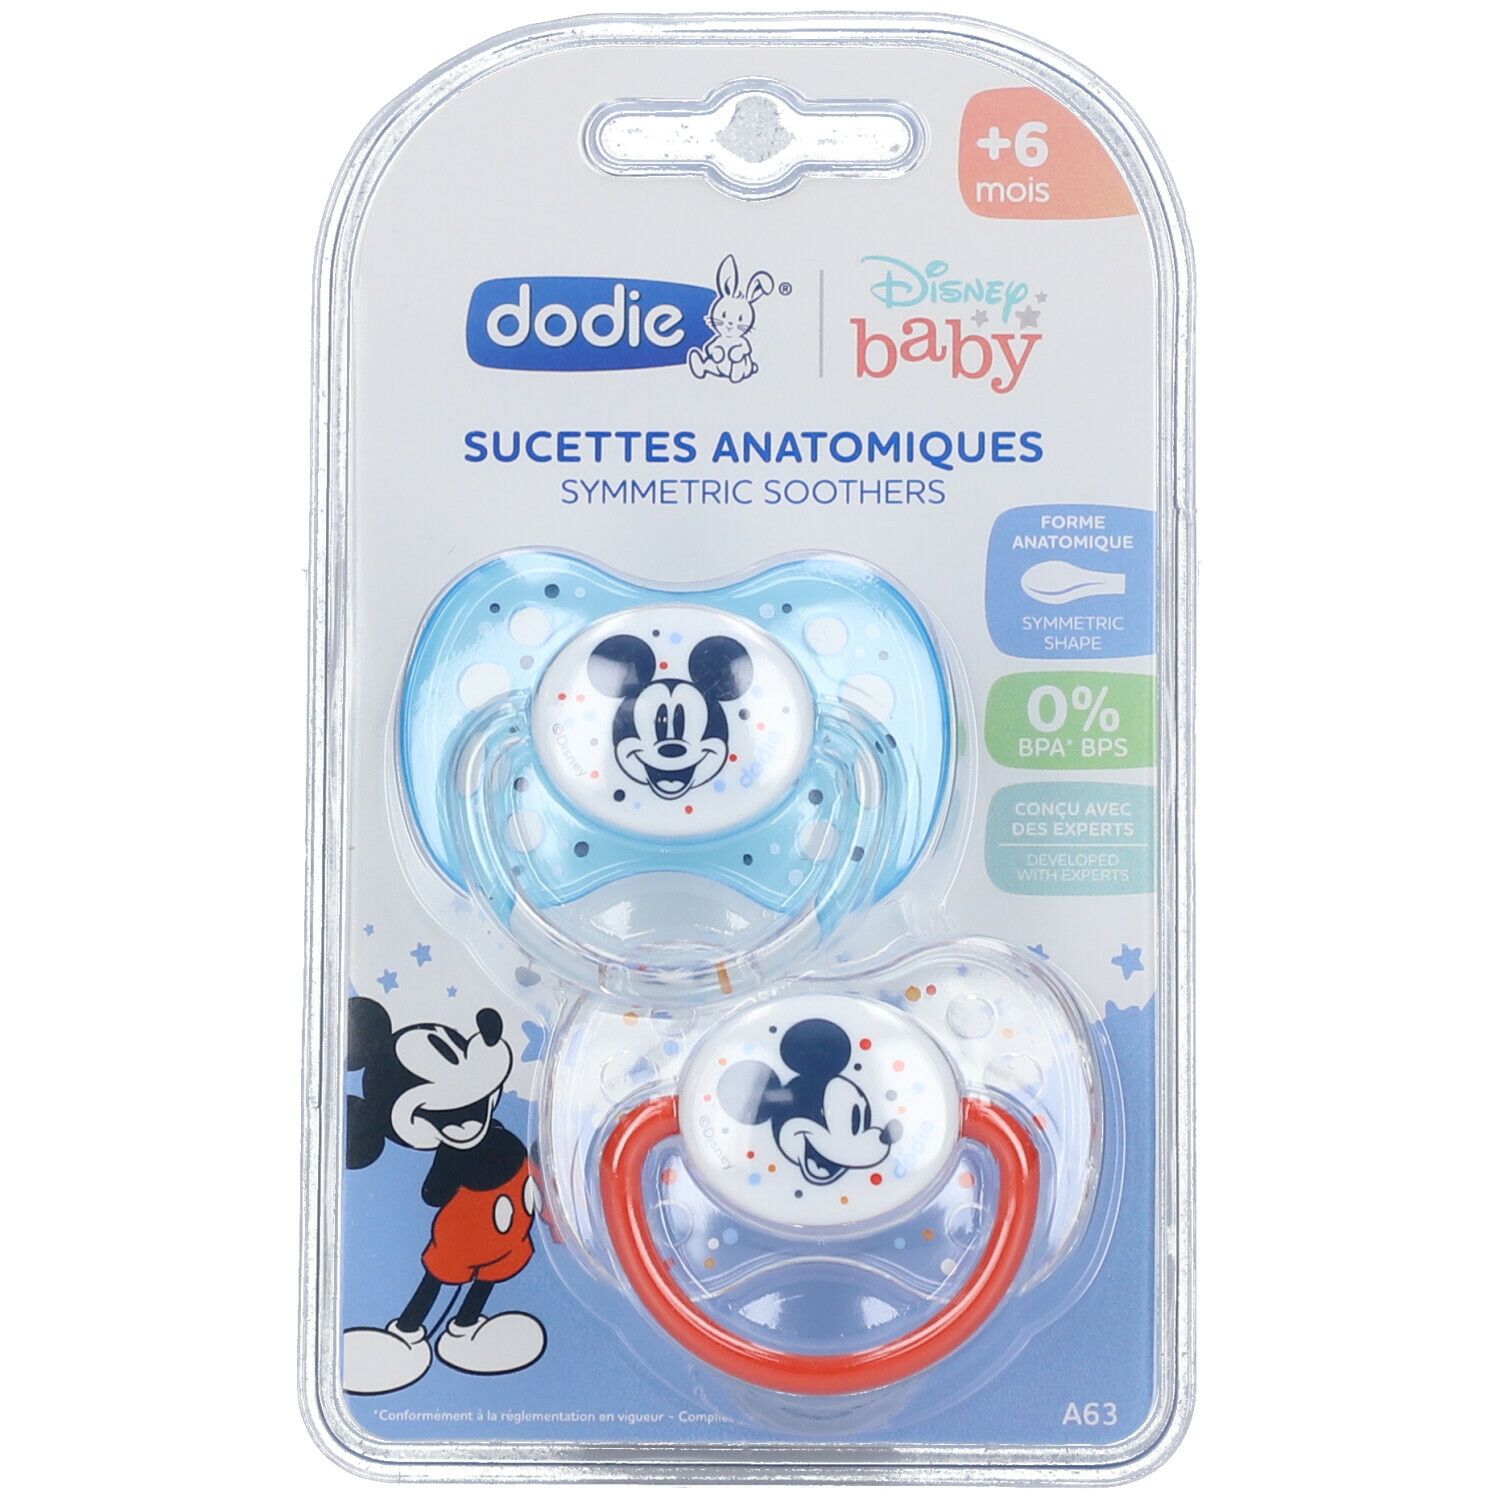 dodie® Sucette Anatomiques +6 mois 'Duo Mickey' silicone avec anneau